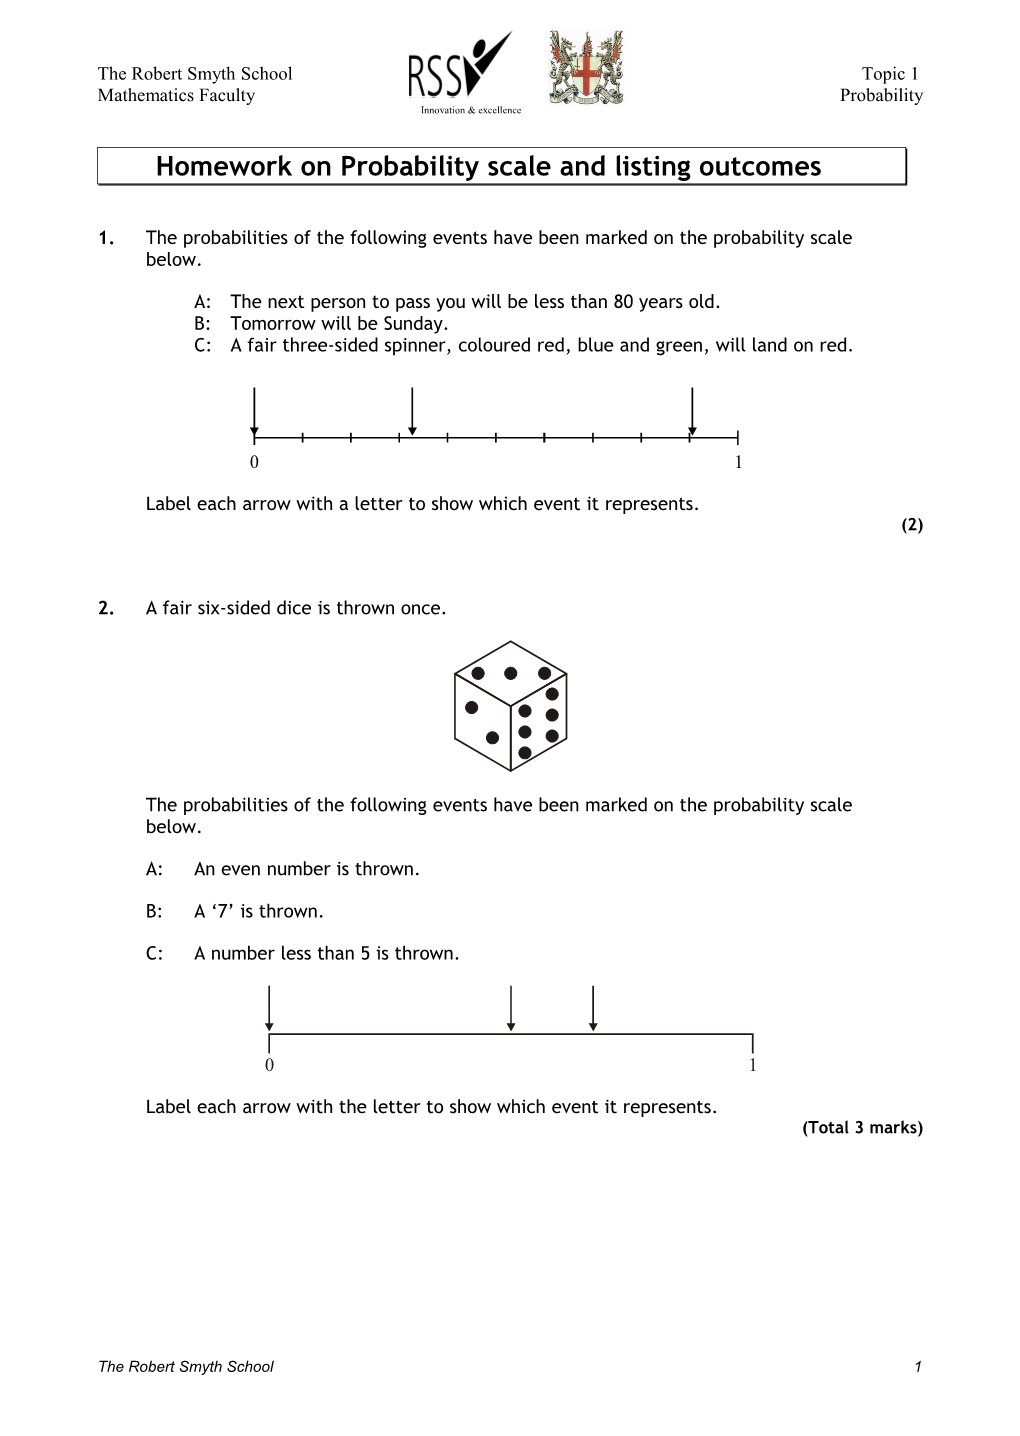 Homework on Probability Scale and Listing Outcomes - Foundation